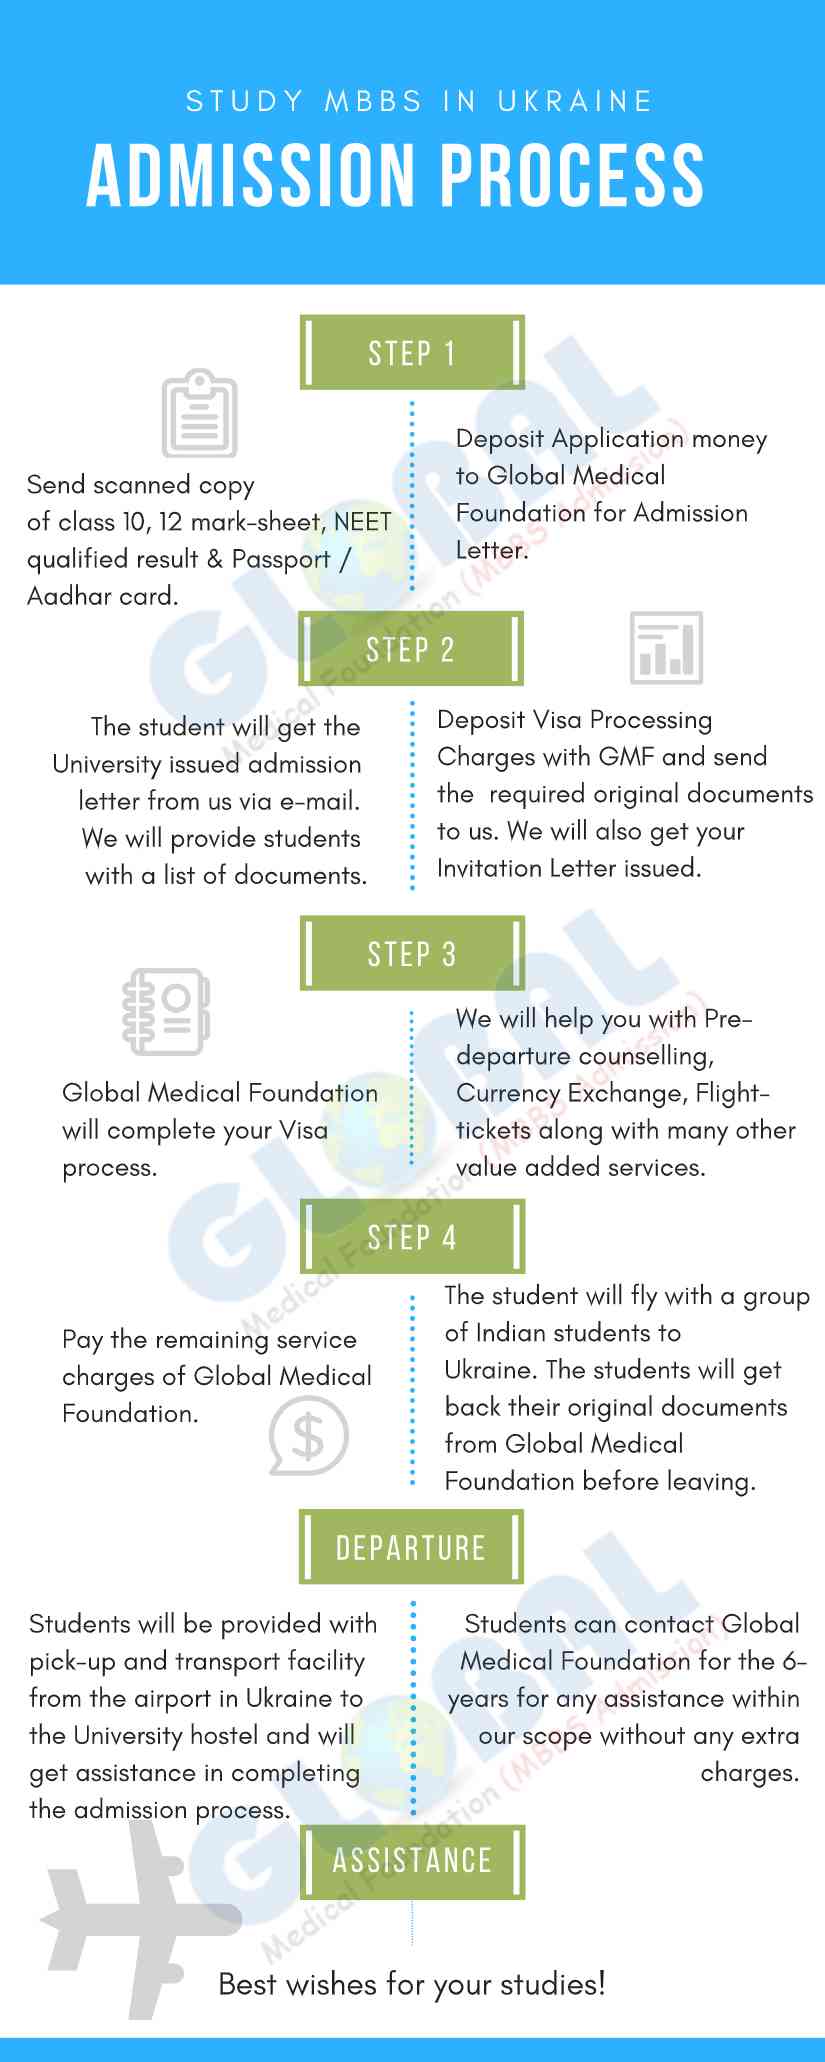 An infographic showing MBBS in Ukraine Admission Process